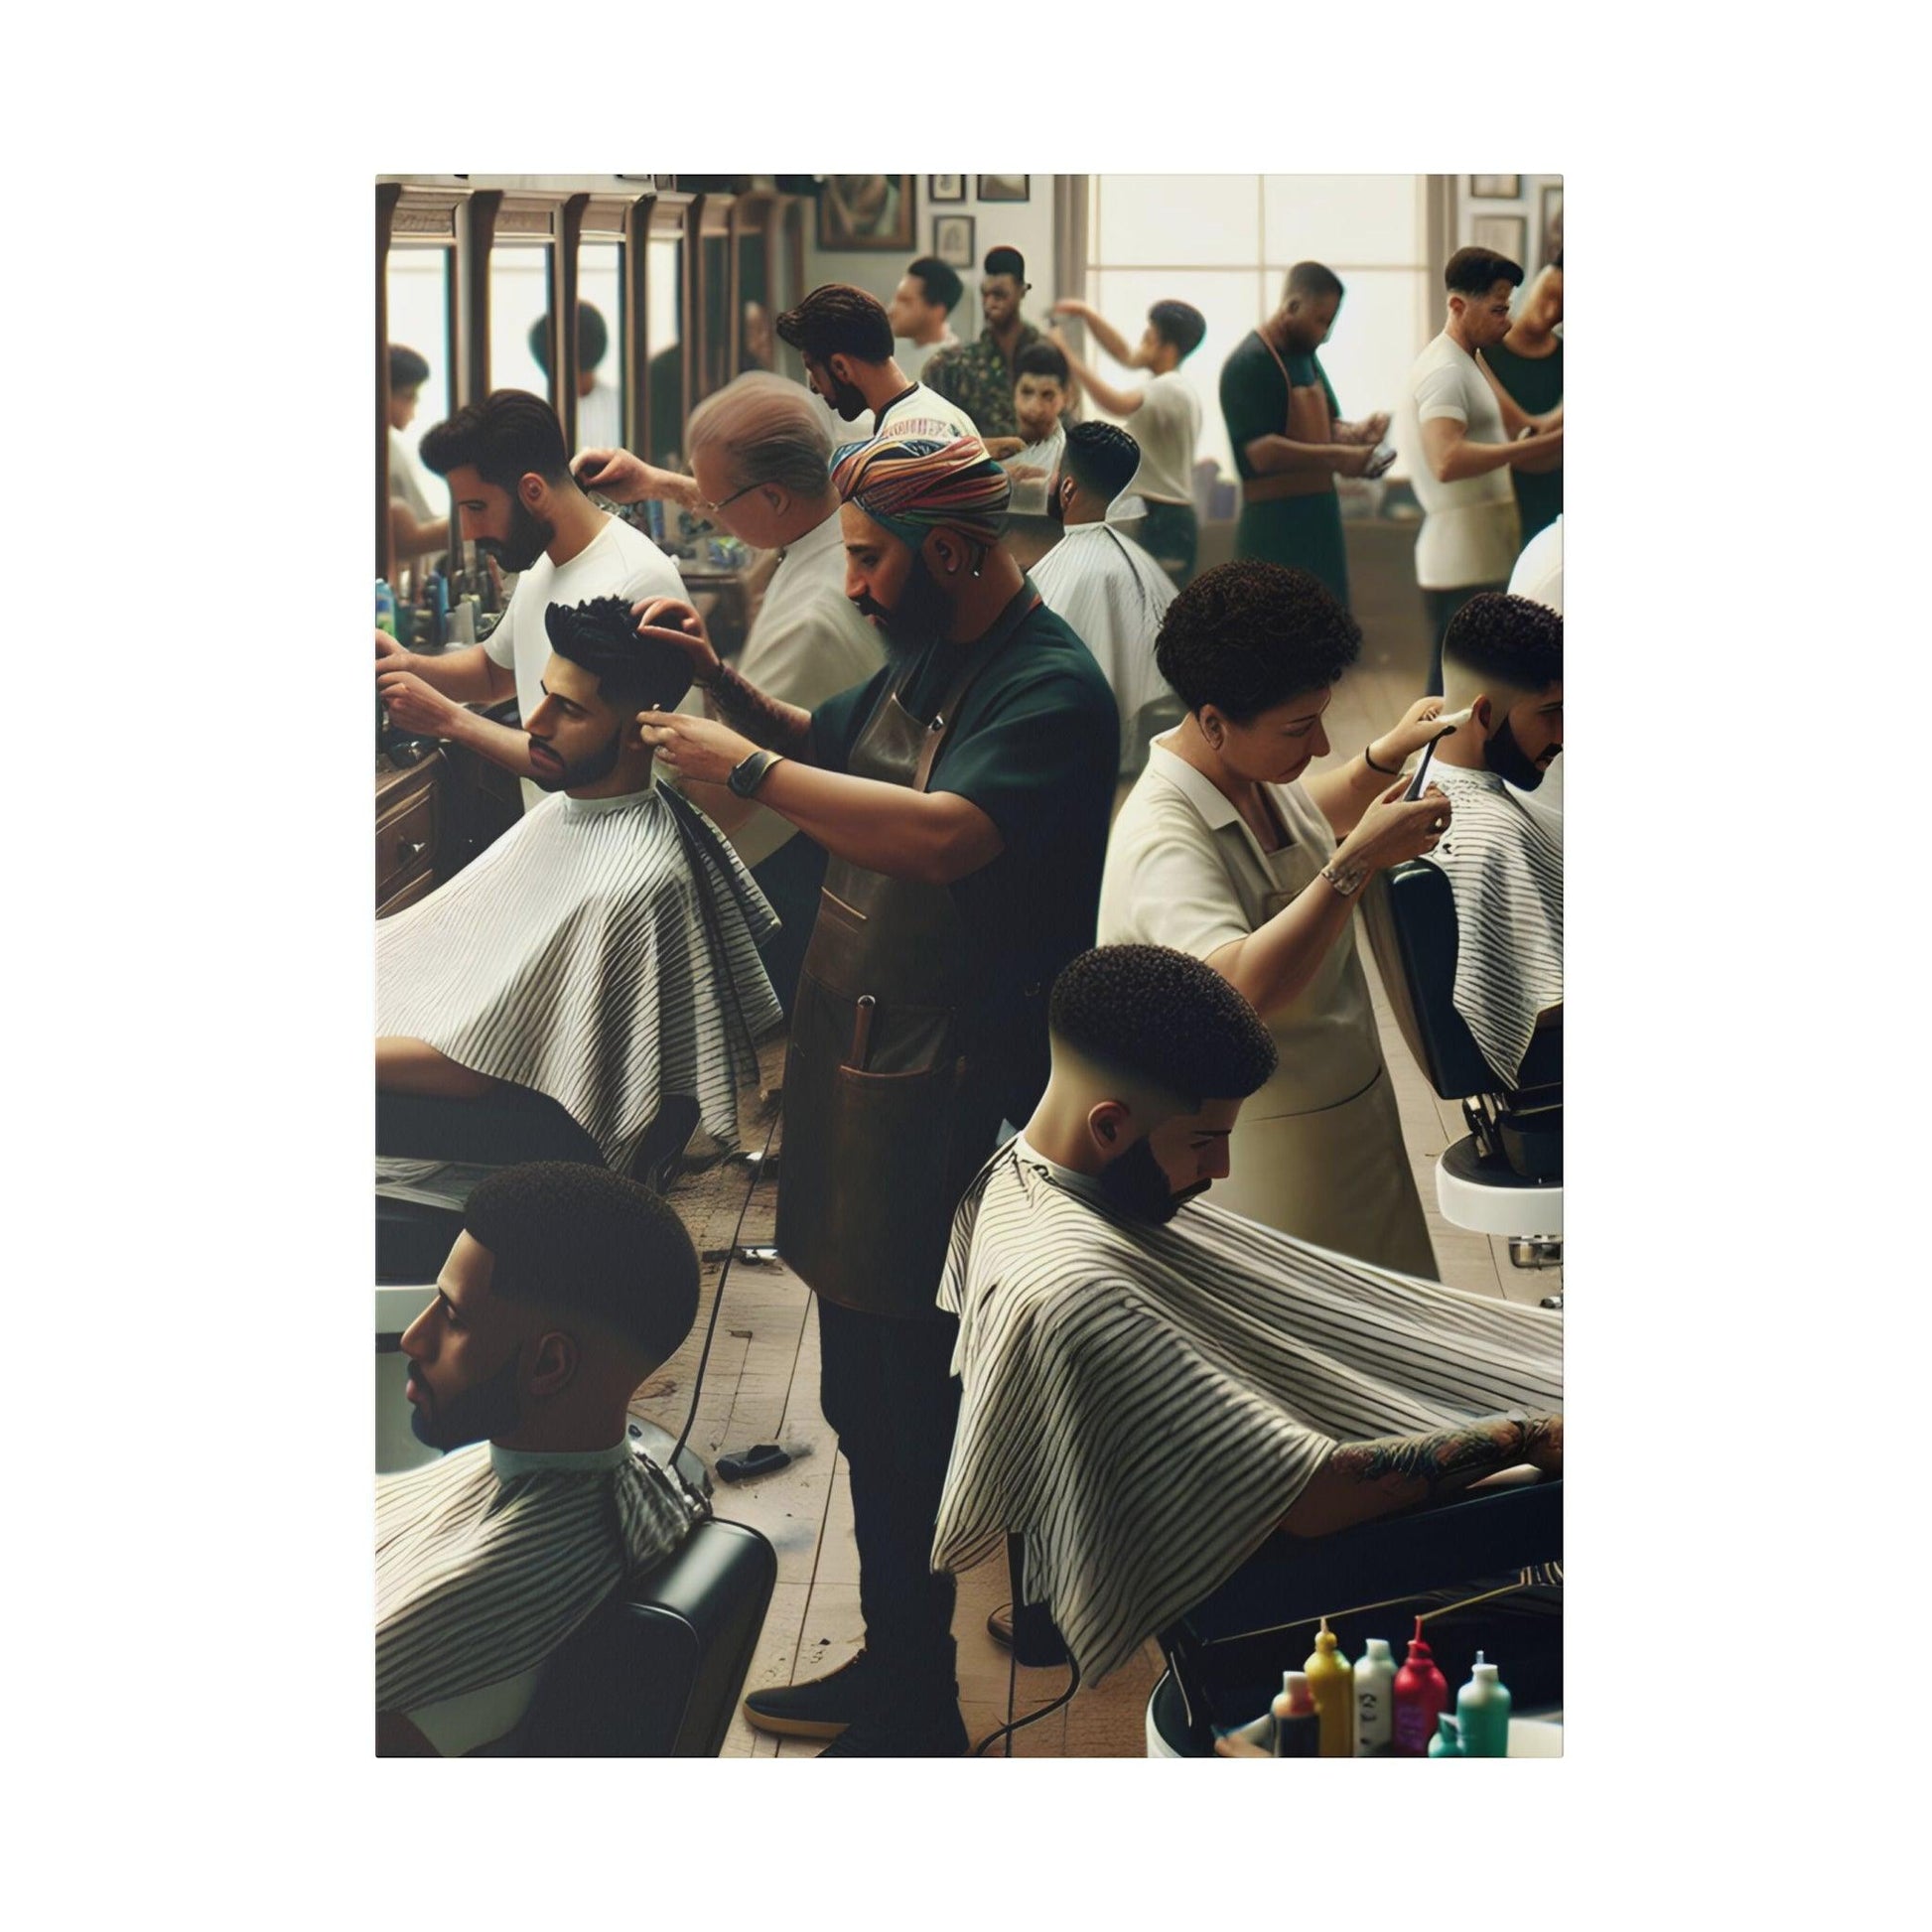 "Barber Shop Chronicles: Timeless Canvas Wall Art" - The Alice Gallery